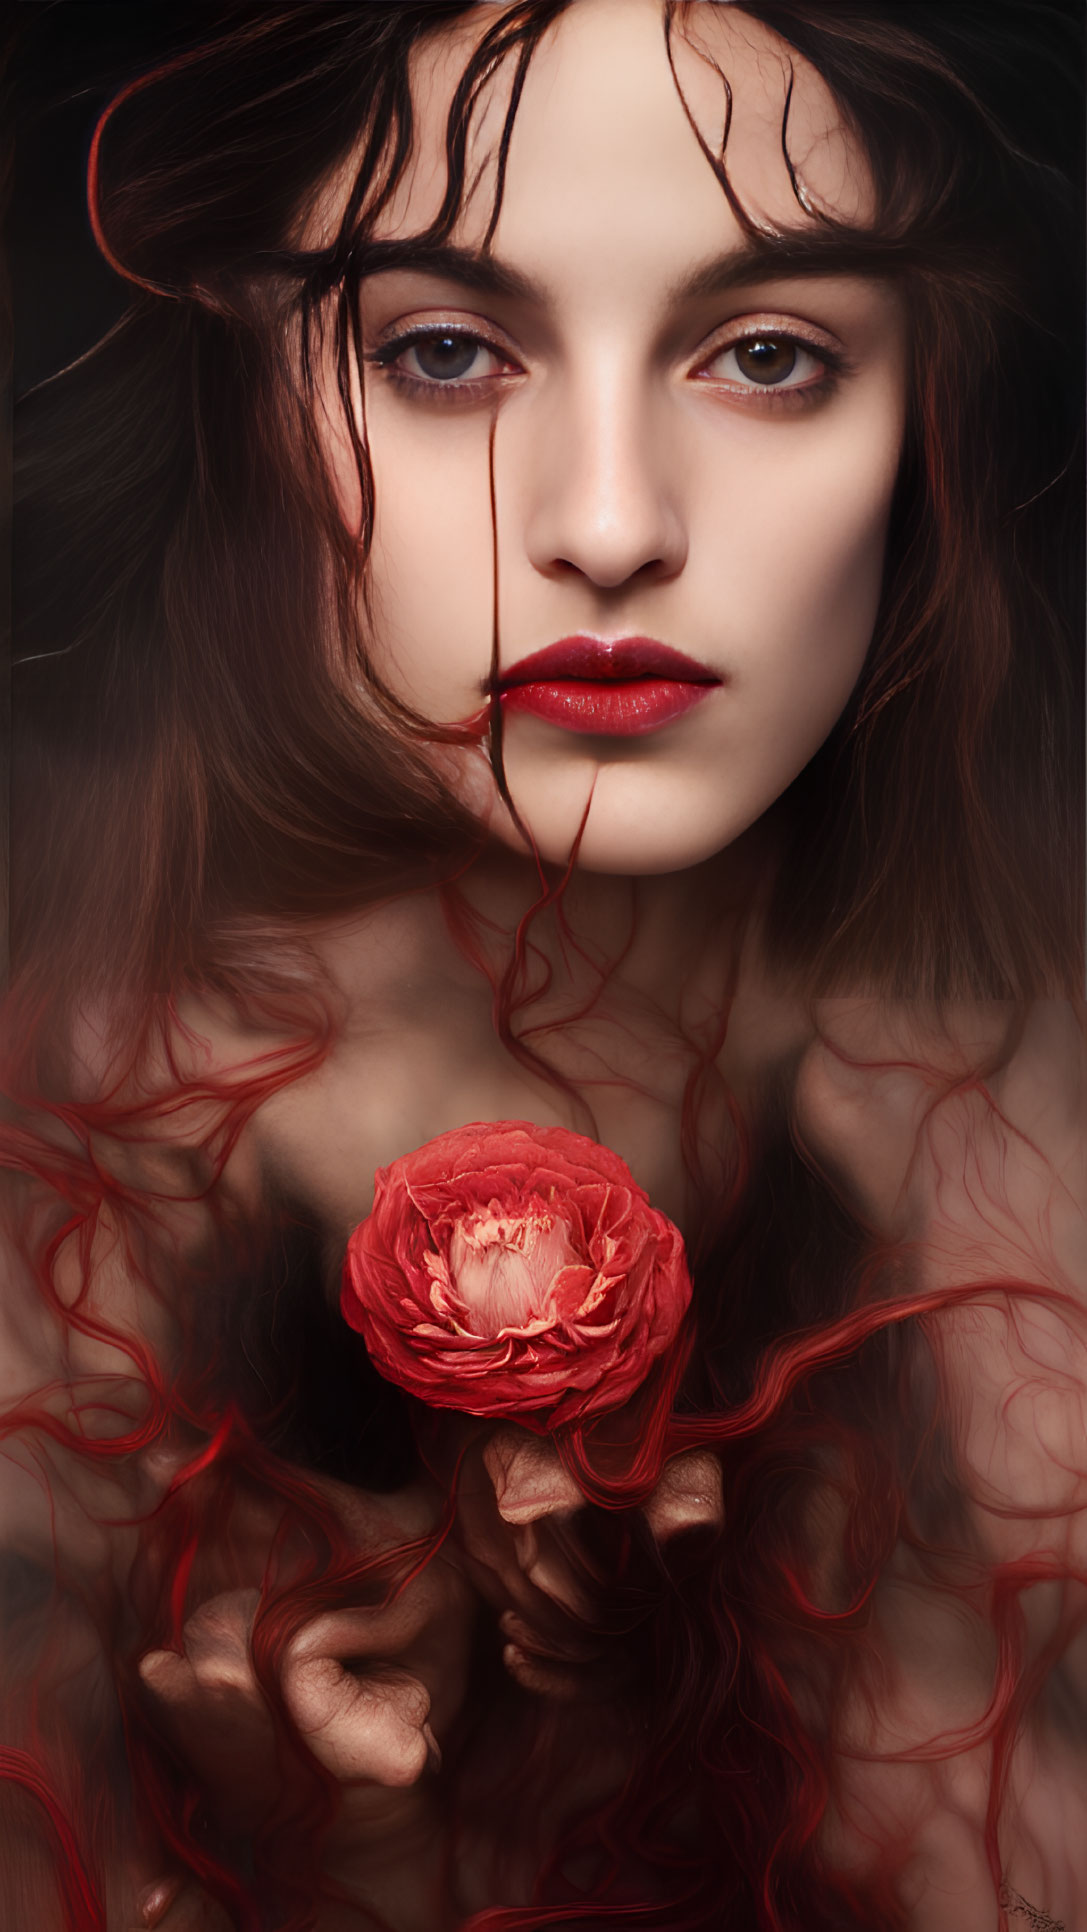 Woman with flowing hair holding red rose exudes dramatic, romantic vibe